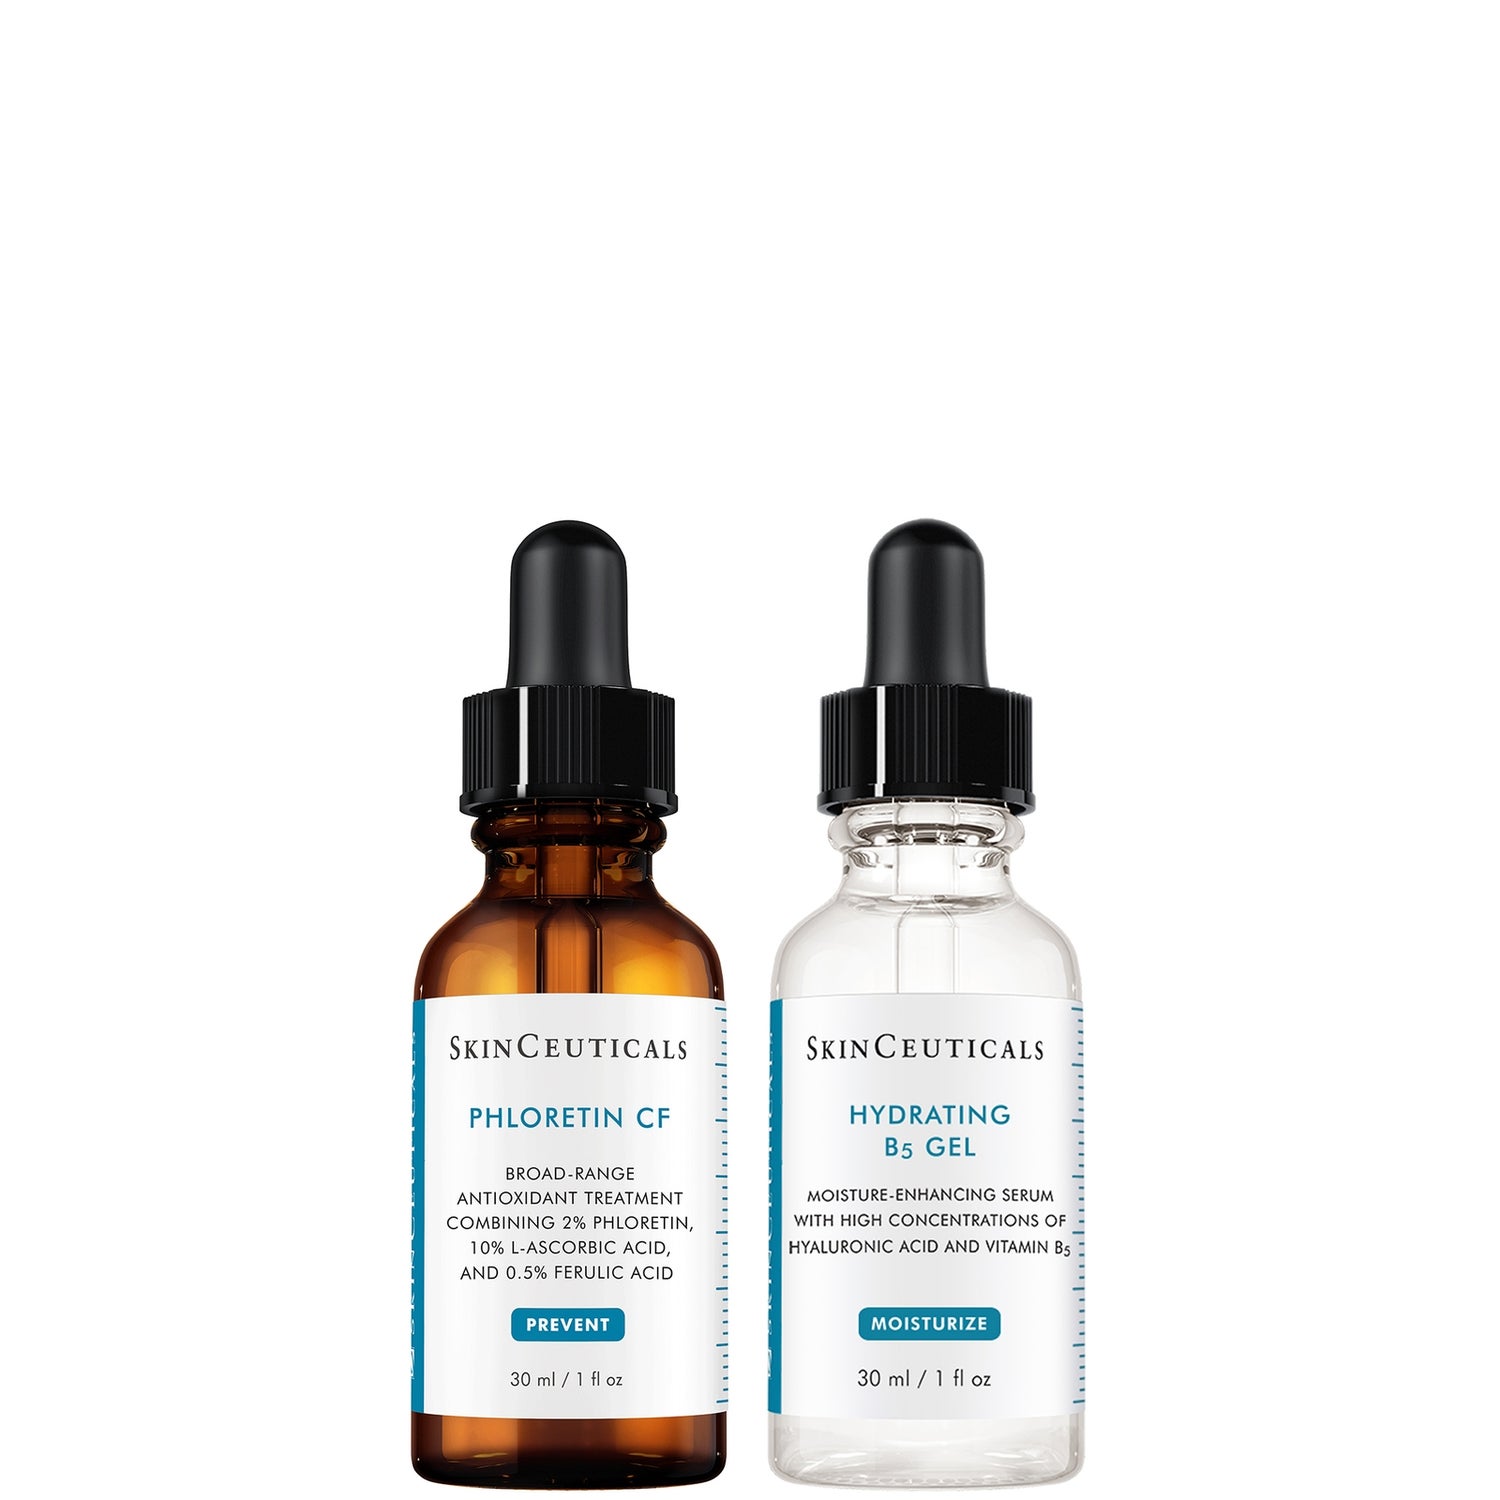 SkinCeuticals Anti-Aging and Discoloration Routine with Vitamin C and Hyaluronic Acid